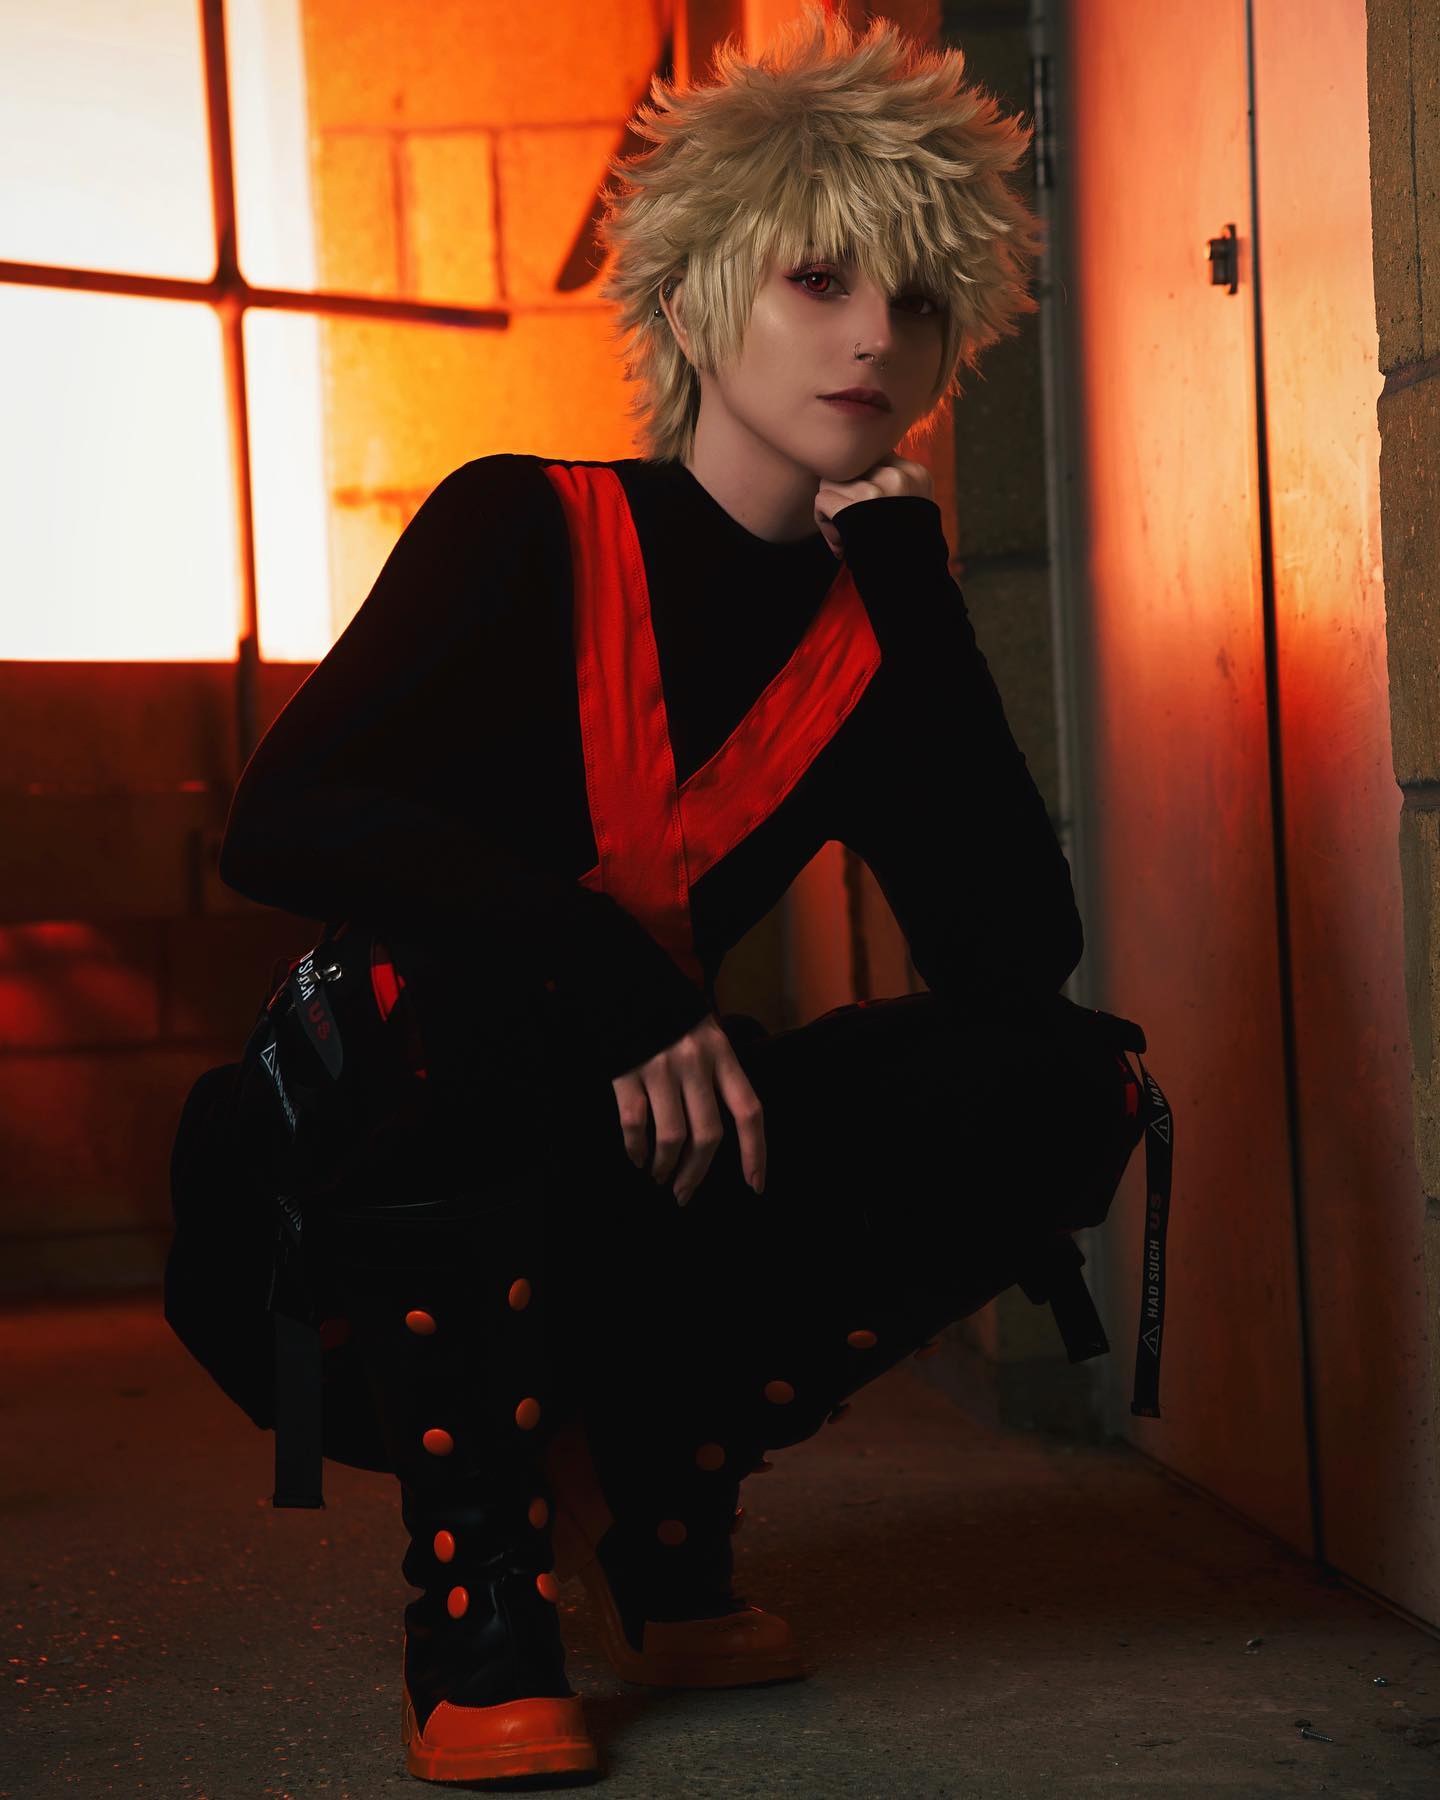 🔥‘Move it extras’🔥
~
the lighting for this shooot 🌞 so good! so glad to have some more shots of my bakugo thank you @matthewmccc for the amazing photos
~
💥cosplayer: @riotwolf.cos 
🖤character: bakugo katsuki
💥anime: boku no hero academia
📸 @matthewmccc 
edit by me
~
~
~
#bakugou #bakugo #bakugoukatsuki #bakugoucosplay #bokunoheroacademia #bokunoheroacademiacosplay #myheroacademia #myheroacademiacosplay #bnha #bnhacosplay #mha #cosplayphotography